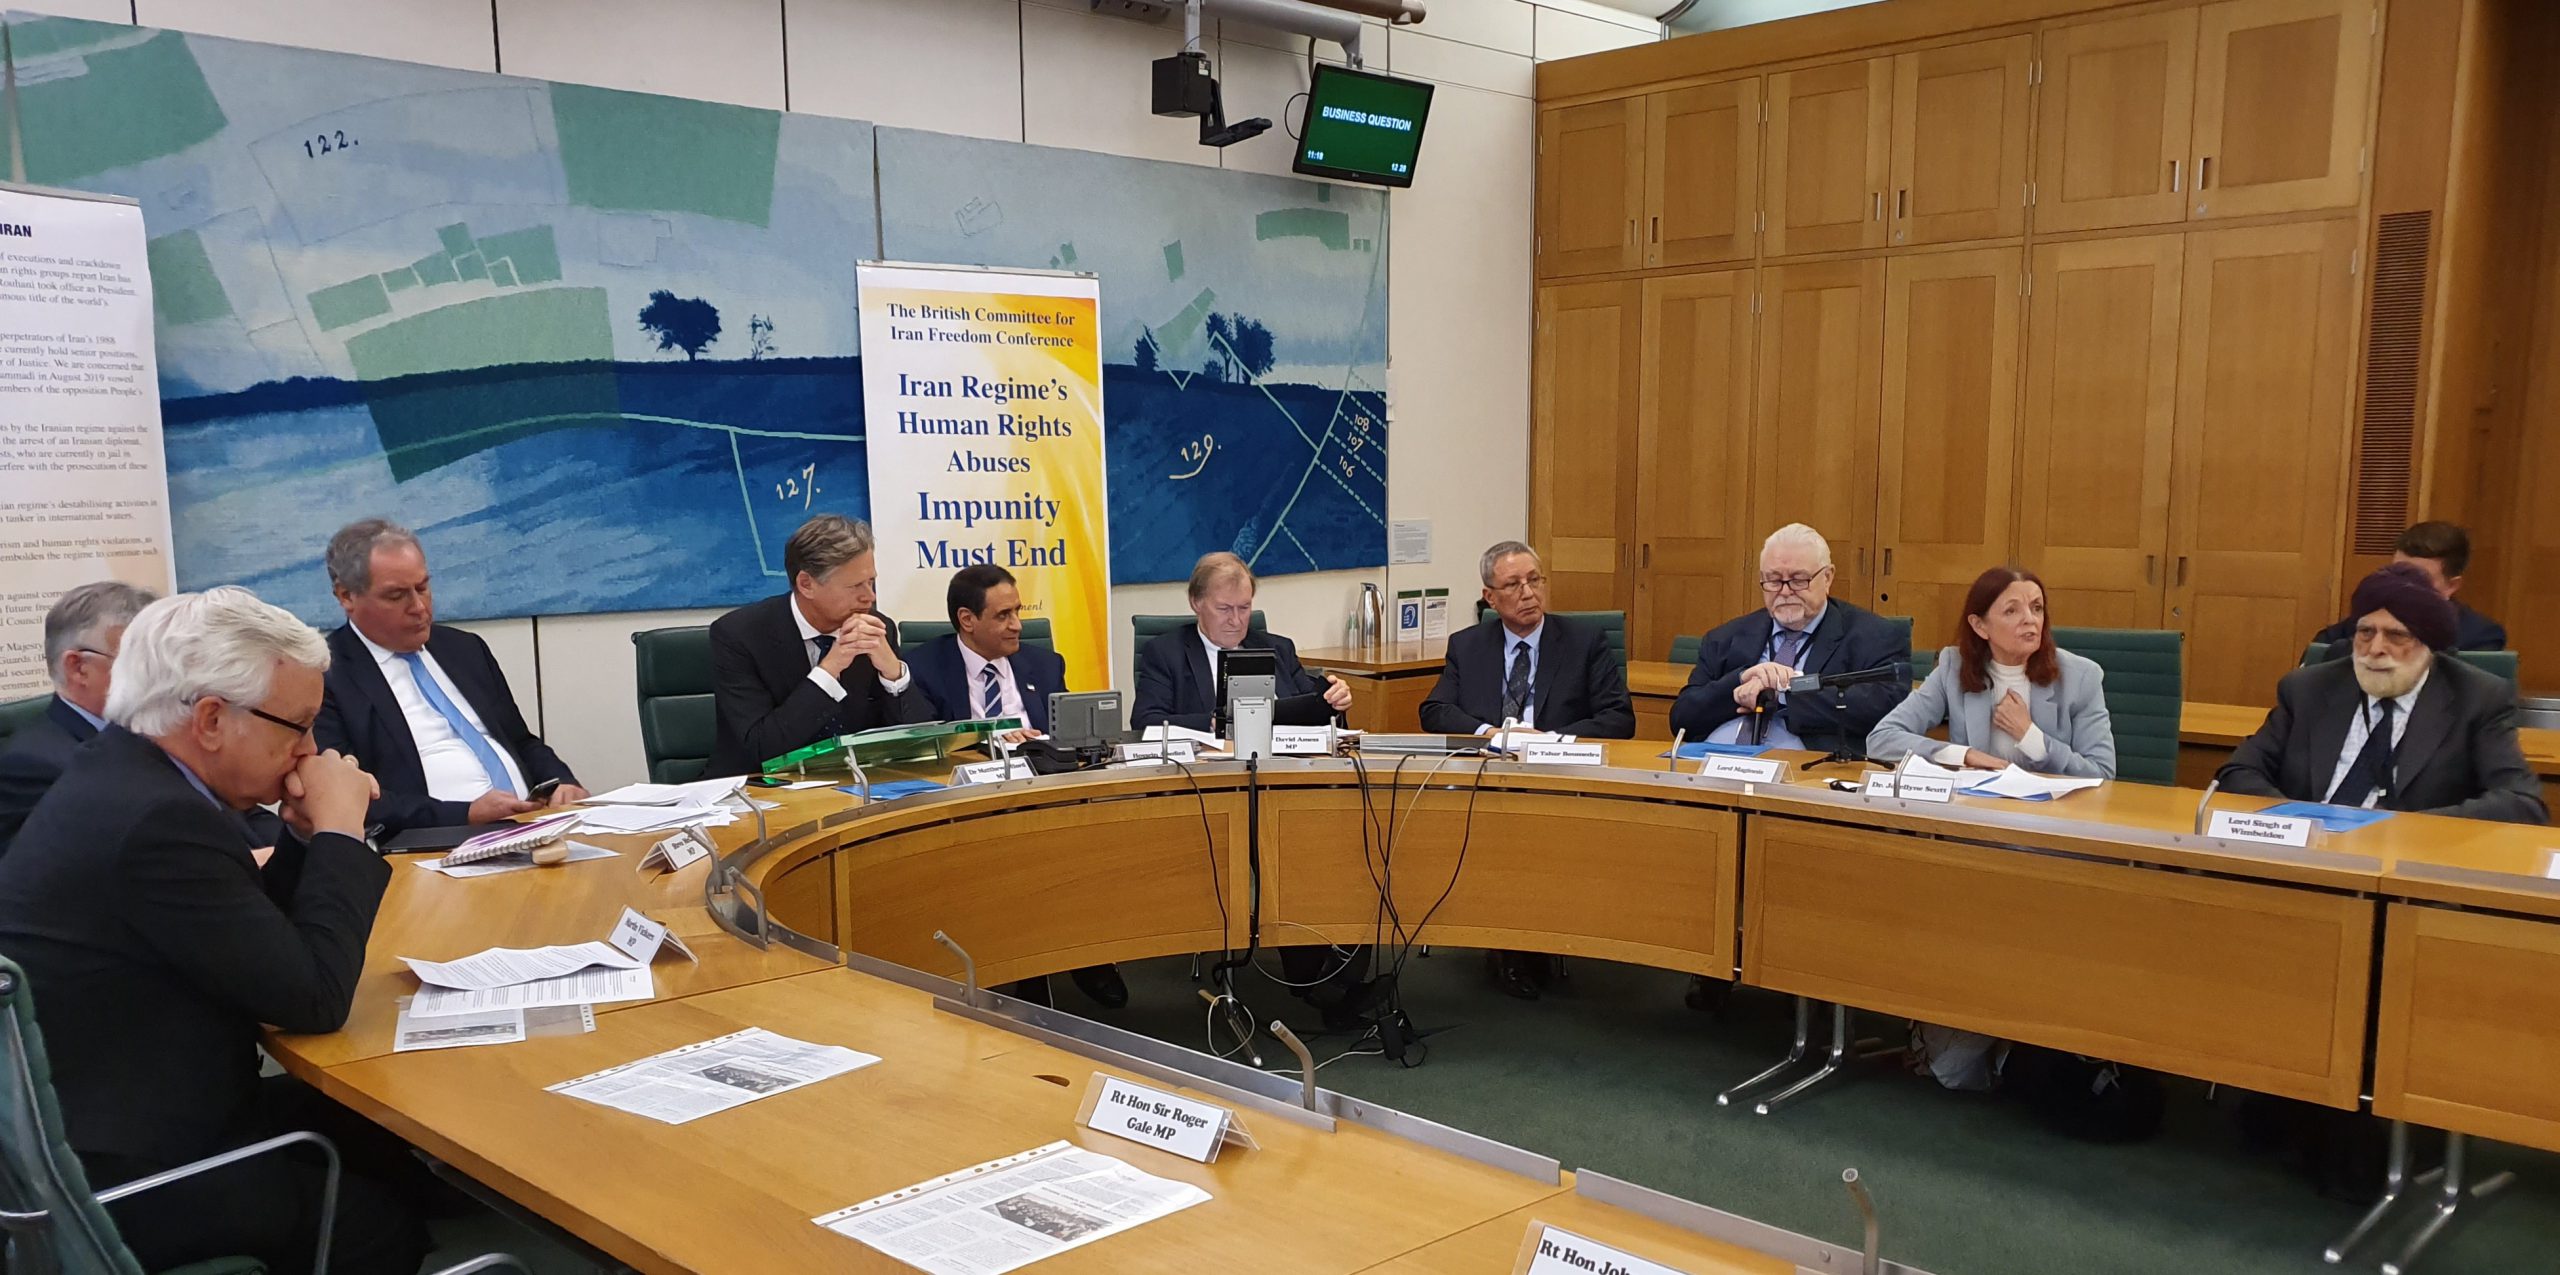 Conference on situation of human rights in Iran, held at the house of commons- October 17, 2019